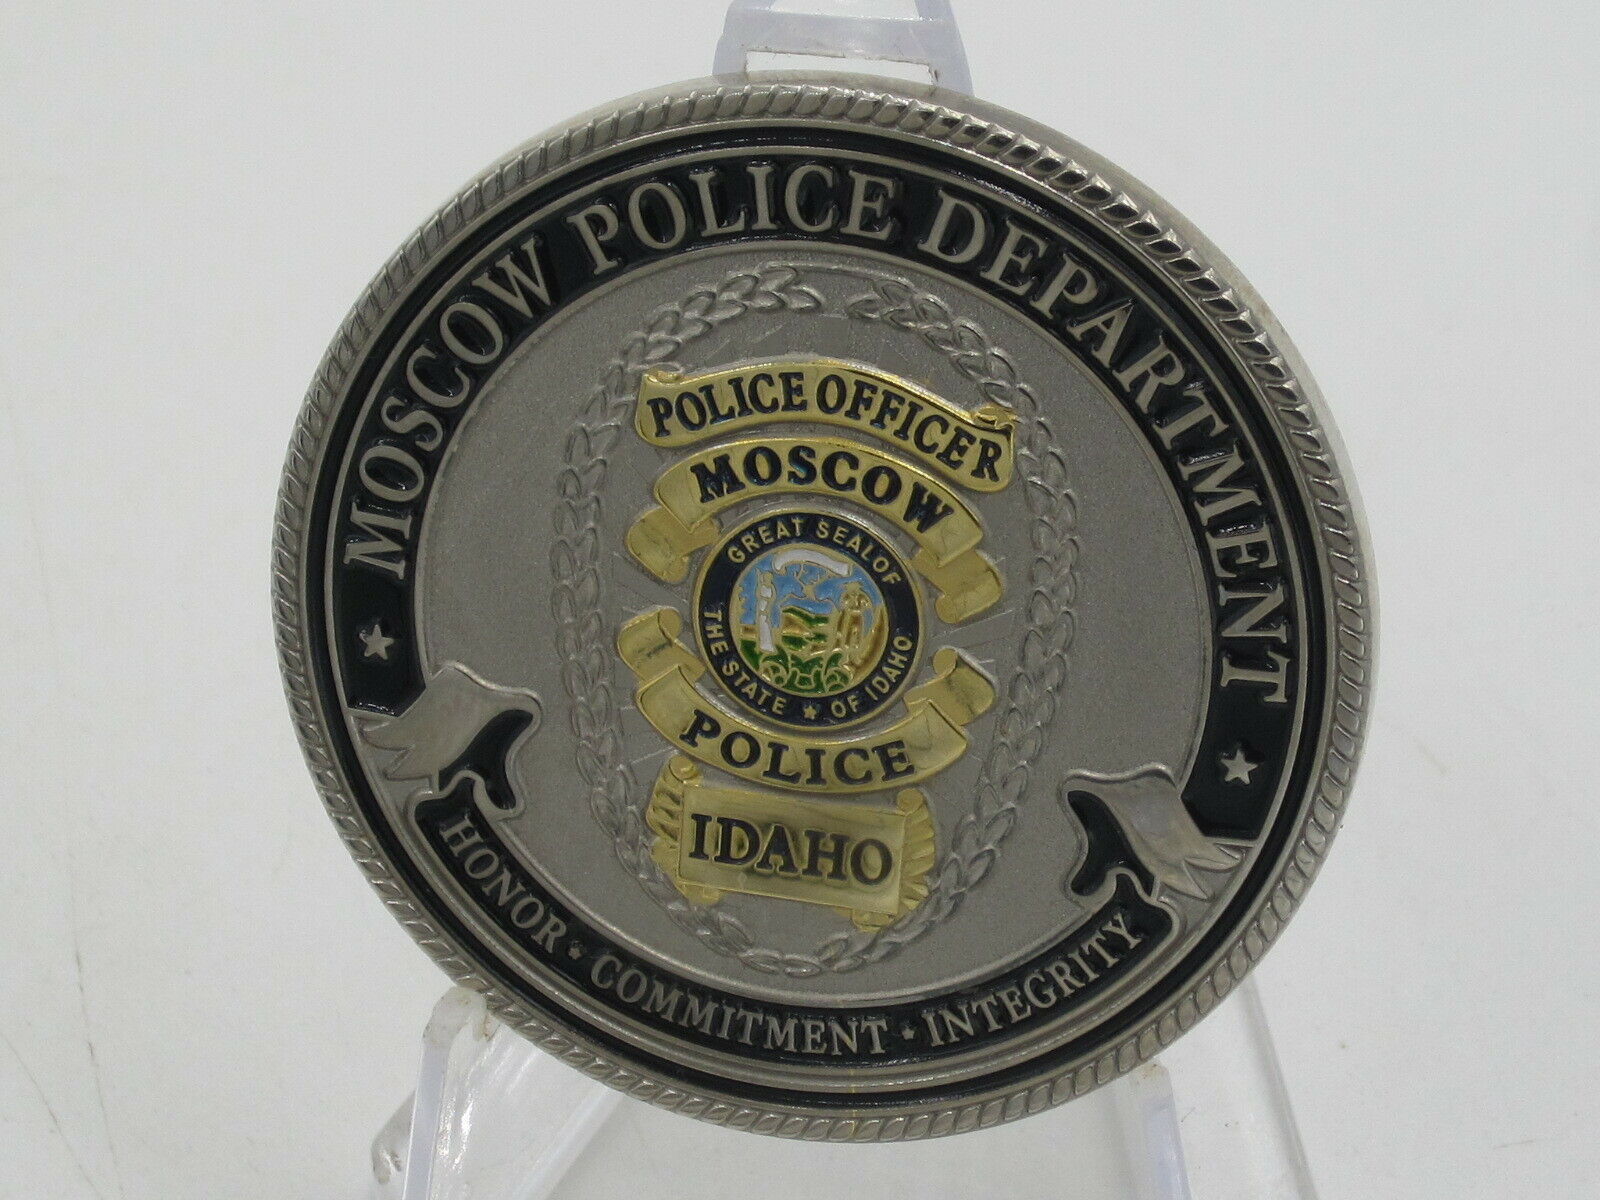 Idaho Moscow Police Department - Police Officer Challenge coin